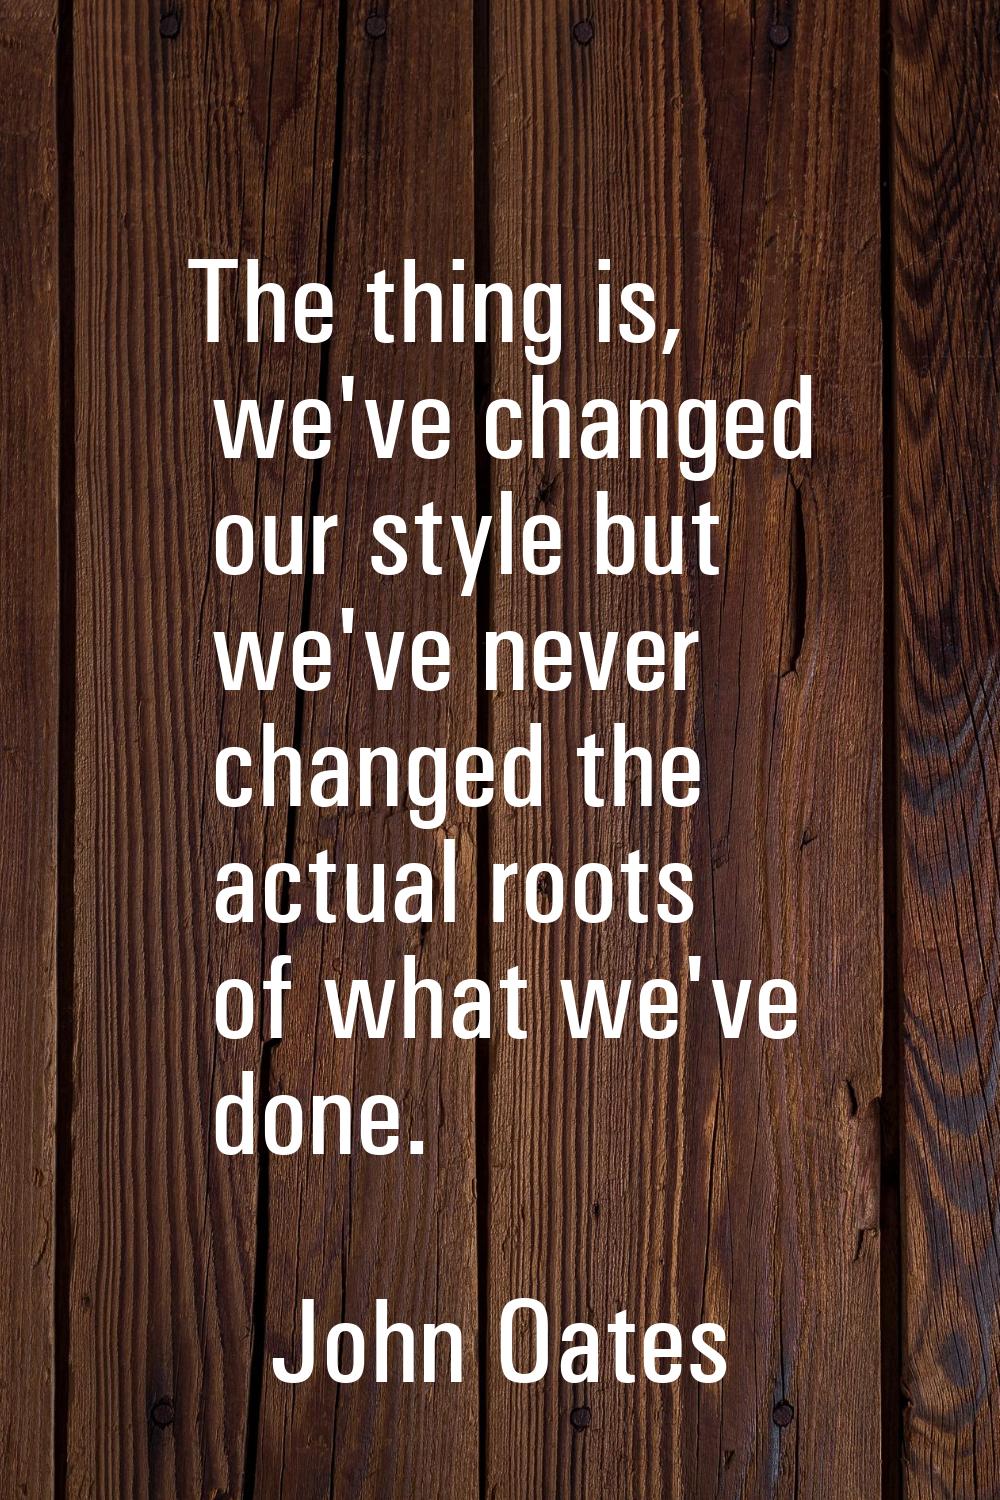 The thing is, we've changed our style but we've never changed the actual roots of what we've done.